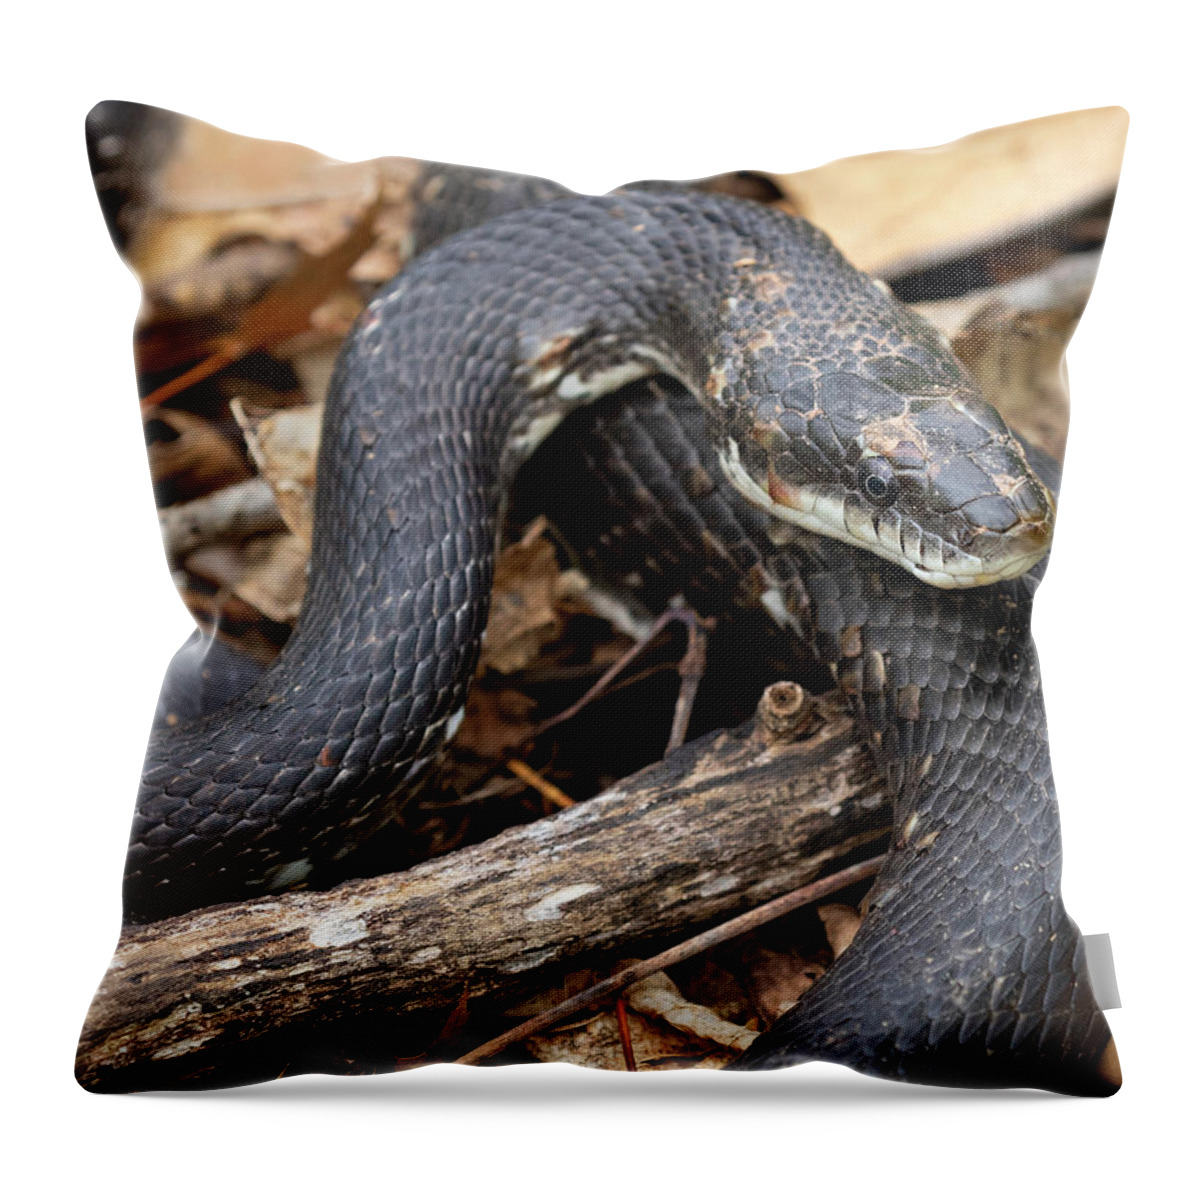 Reptile Throw Pillow featuring the photograph Black Rat Snake by Art Cole